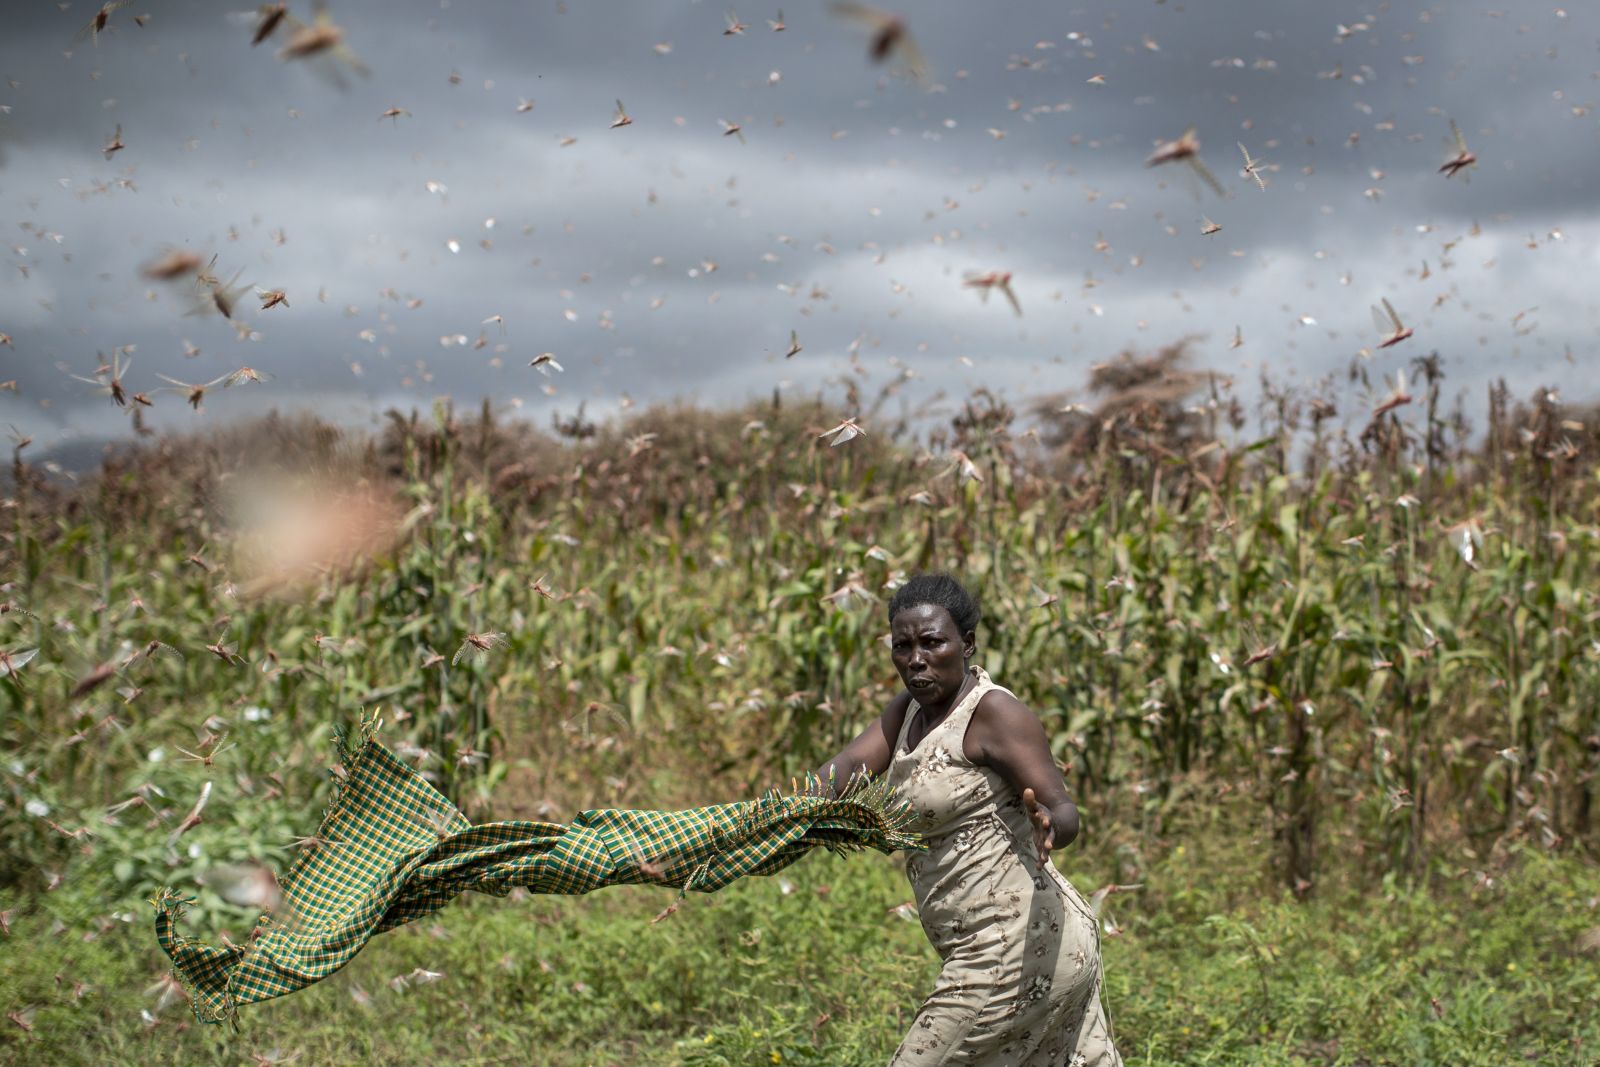 Locusts have multiplied because of unusually wet weather last year and are now causing serious damage in Kenya.